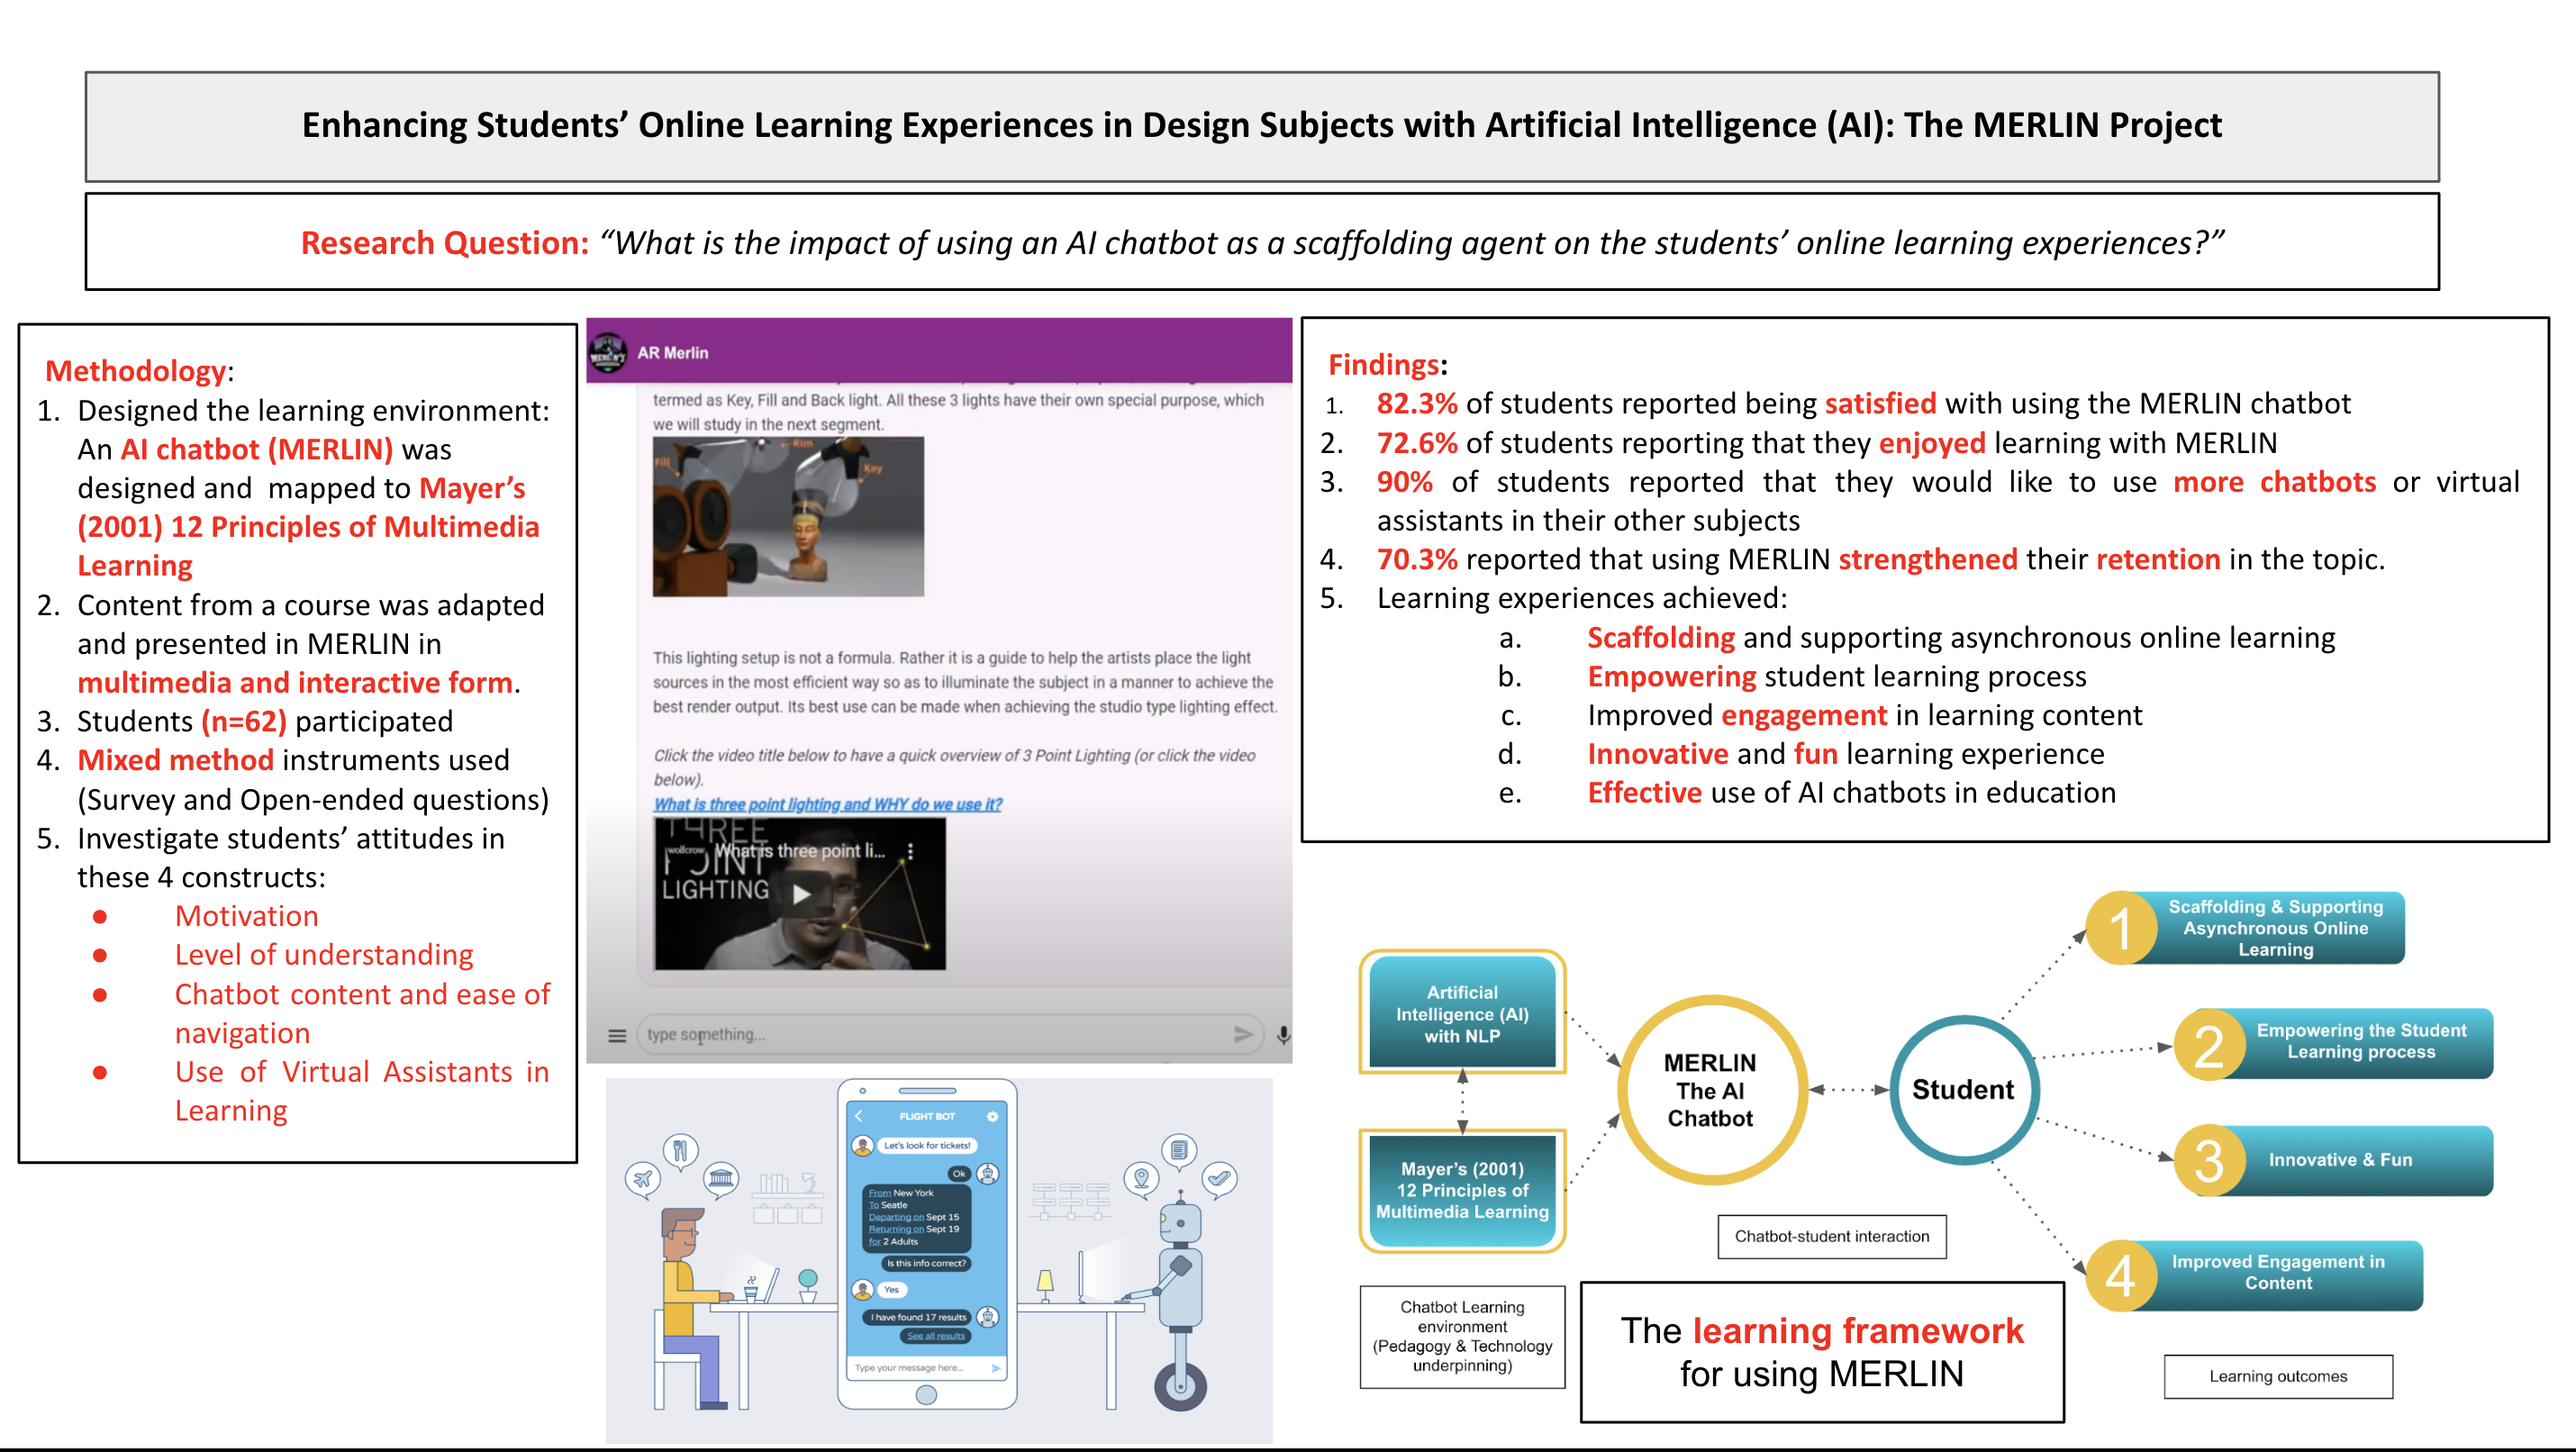 Index terms: Artificial intelligence; Chatbot; Learner experience; Multimedia learning; Scaffold